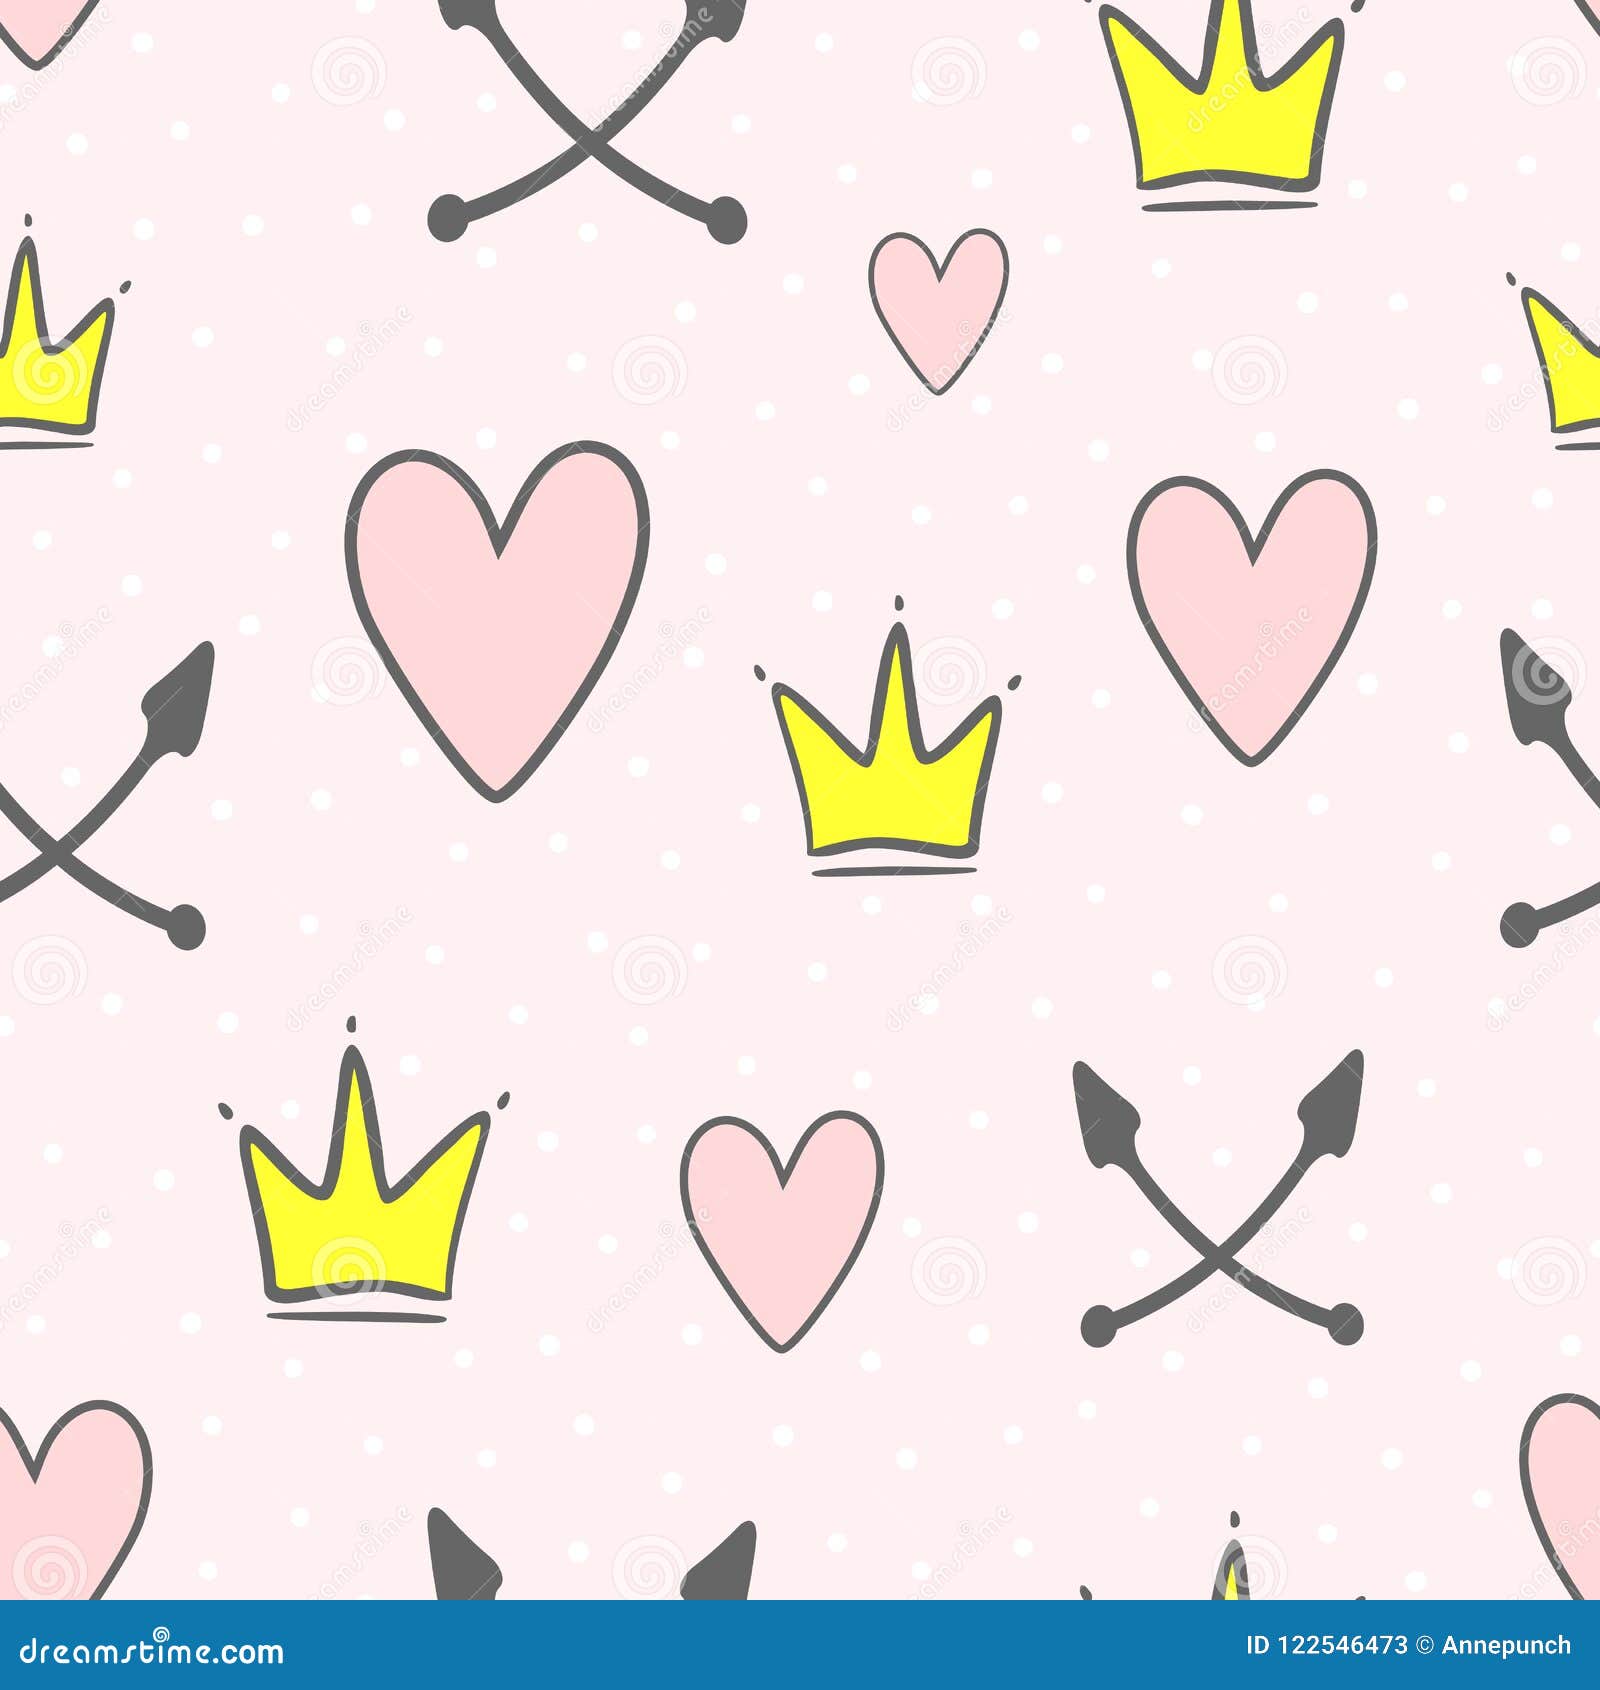 cute seamless pattern with crowns, hearts, crossed arrows and round dots. endless girlish print.